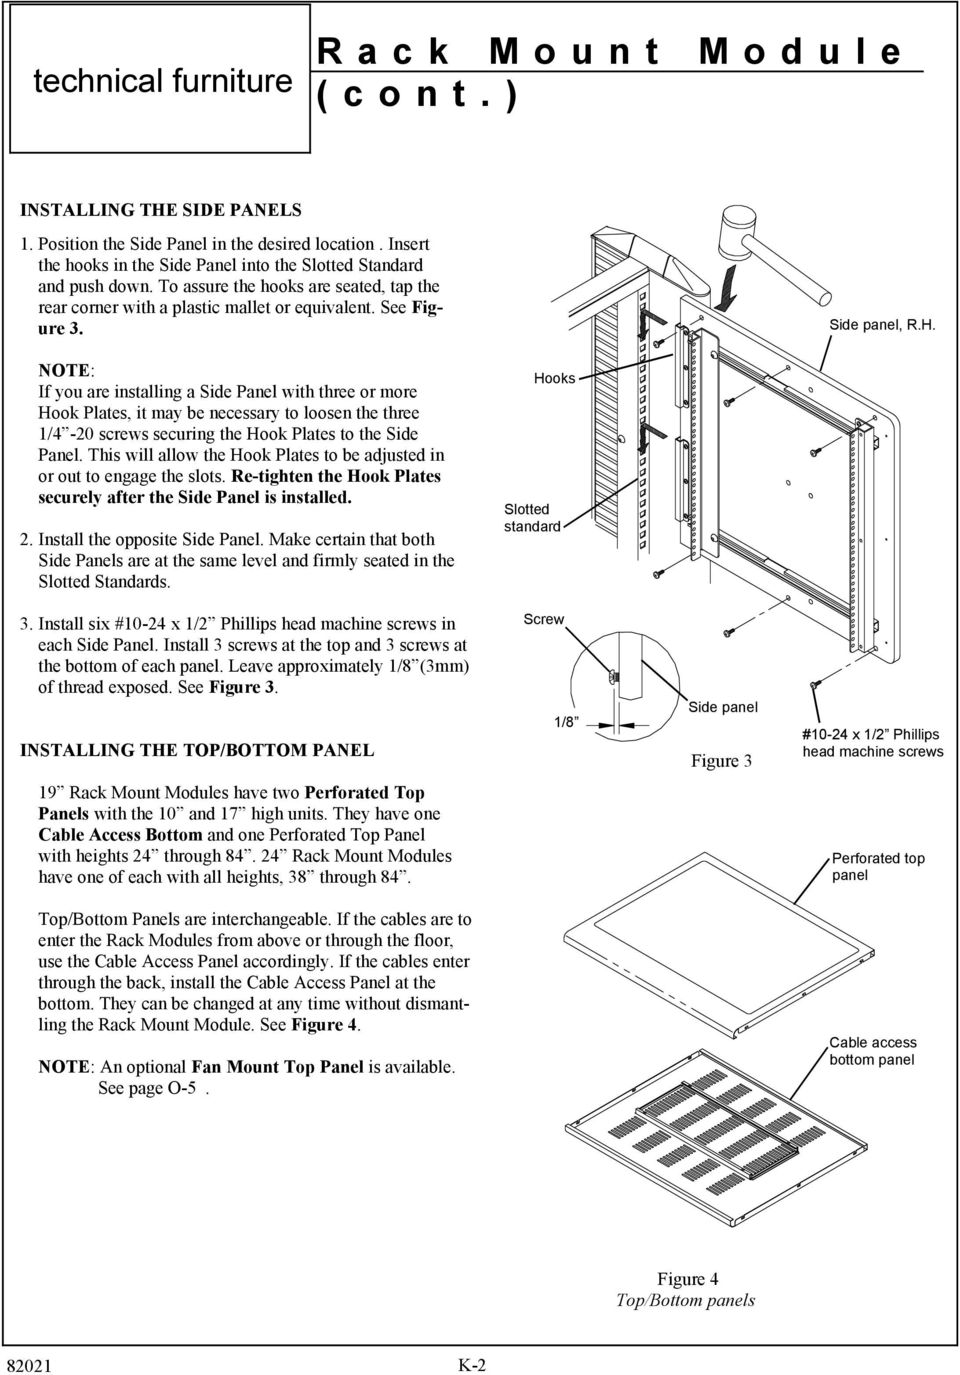 NOTE: If you are installing a Side Panel with three or more Hook Plates, it may be necessary to loosen the three 1/4-20 screws securing the Hook Plates to the Side Panel.